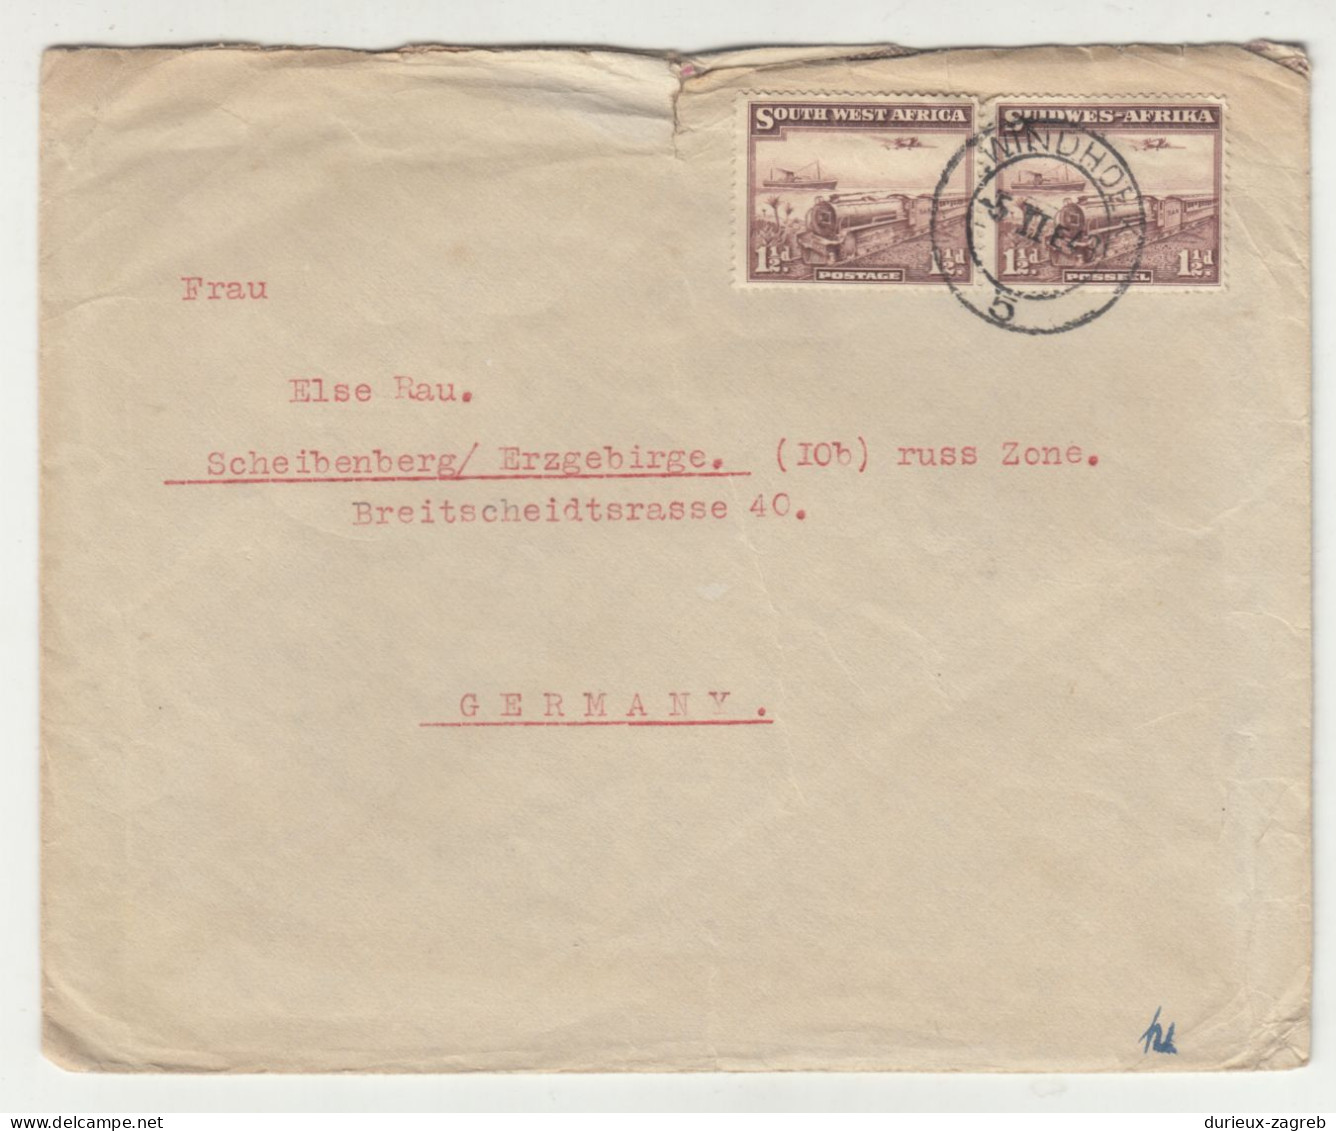 South West Africa Letter Cover Posted 1948 To Germany B240503 - Zuidwest-Afrika (1923-1990)